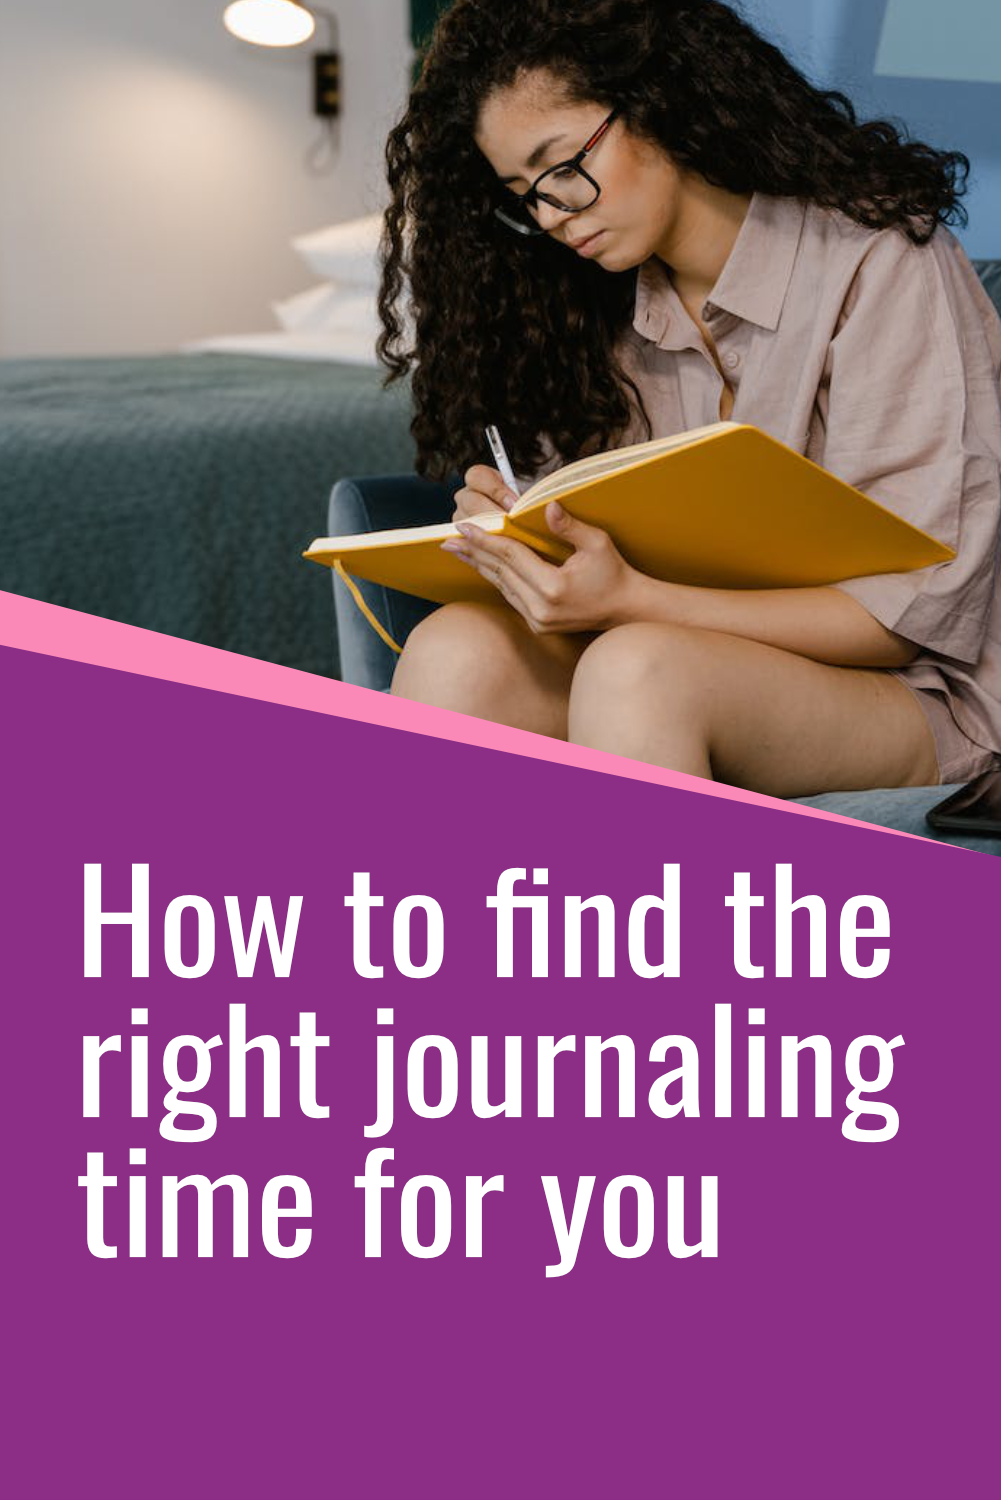 Social media image that says how to find the right jorunaling time for you